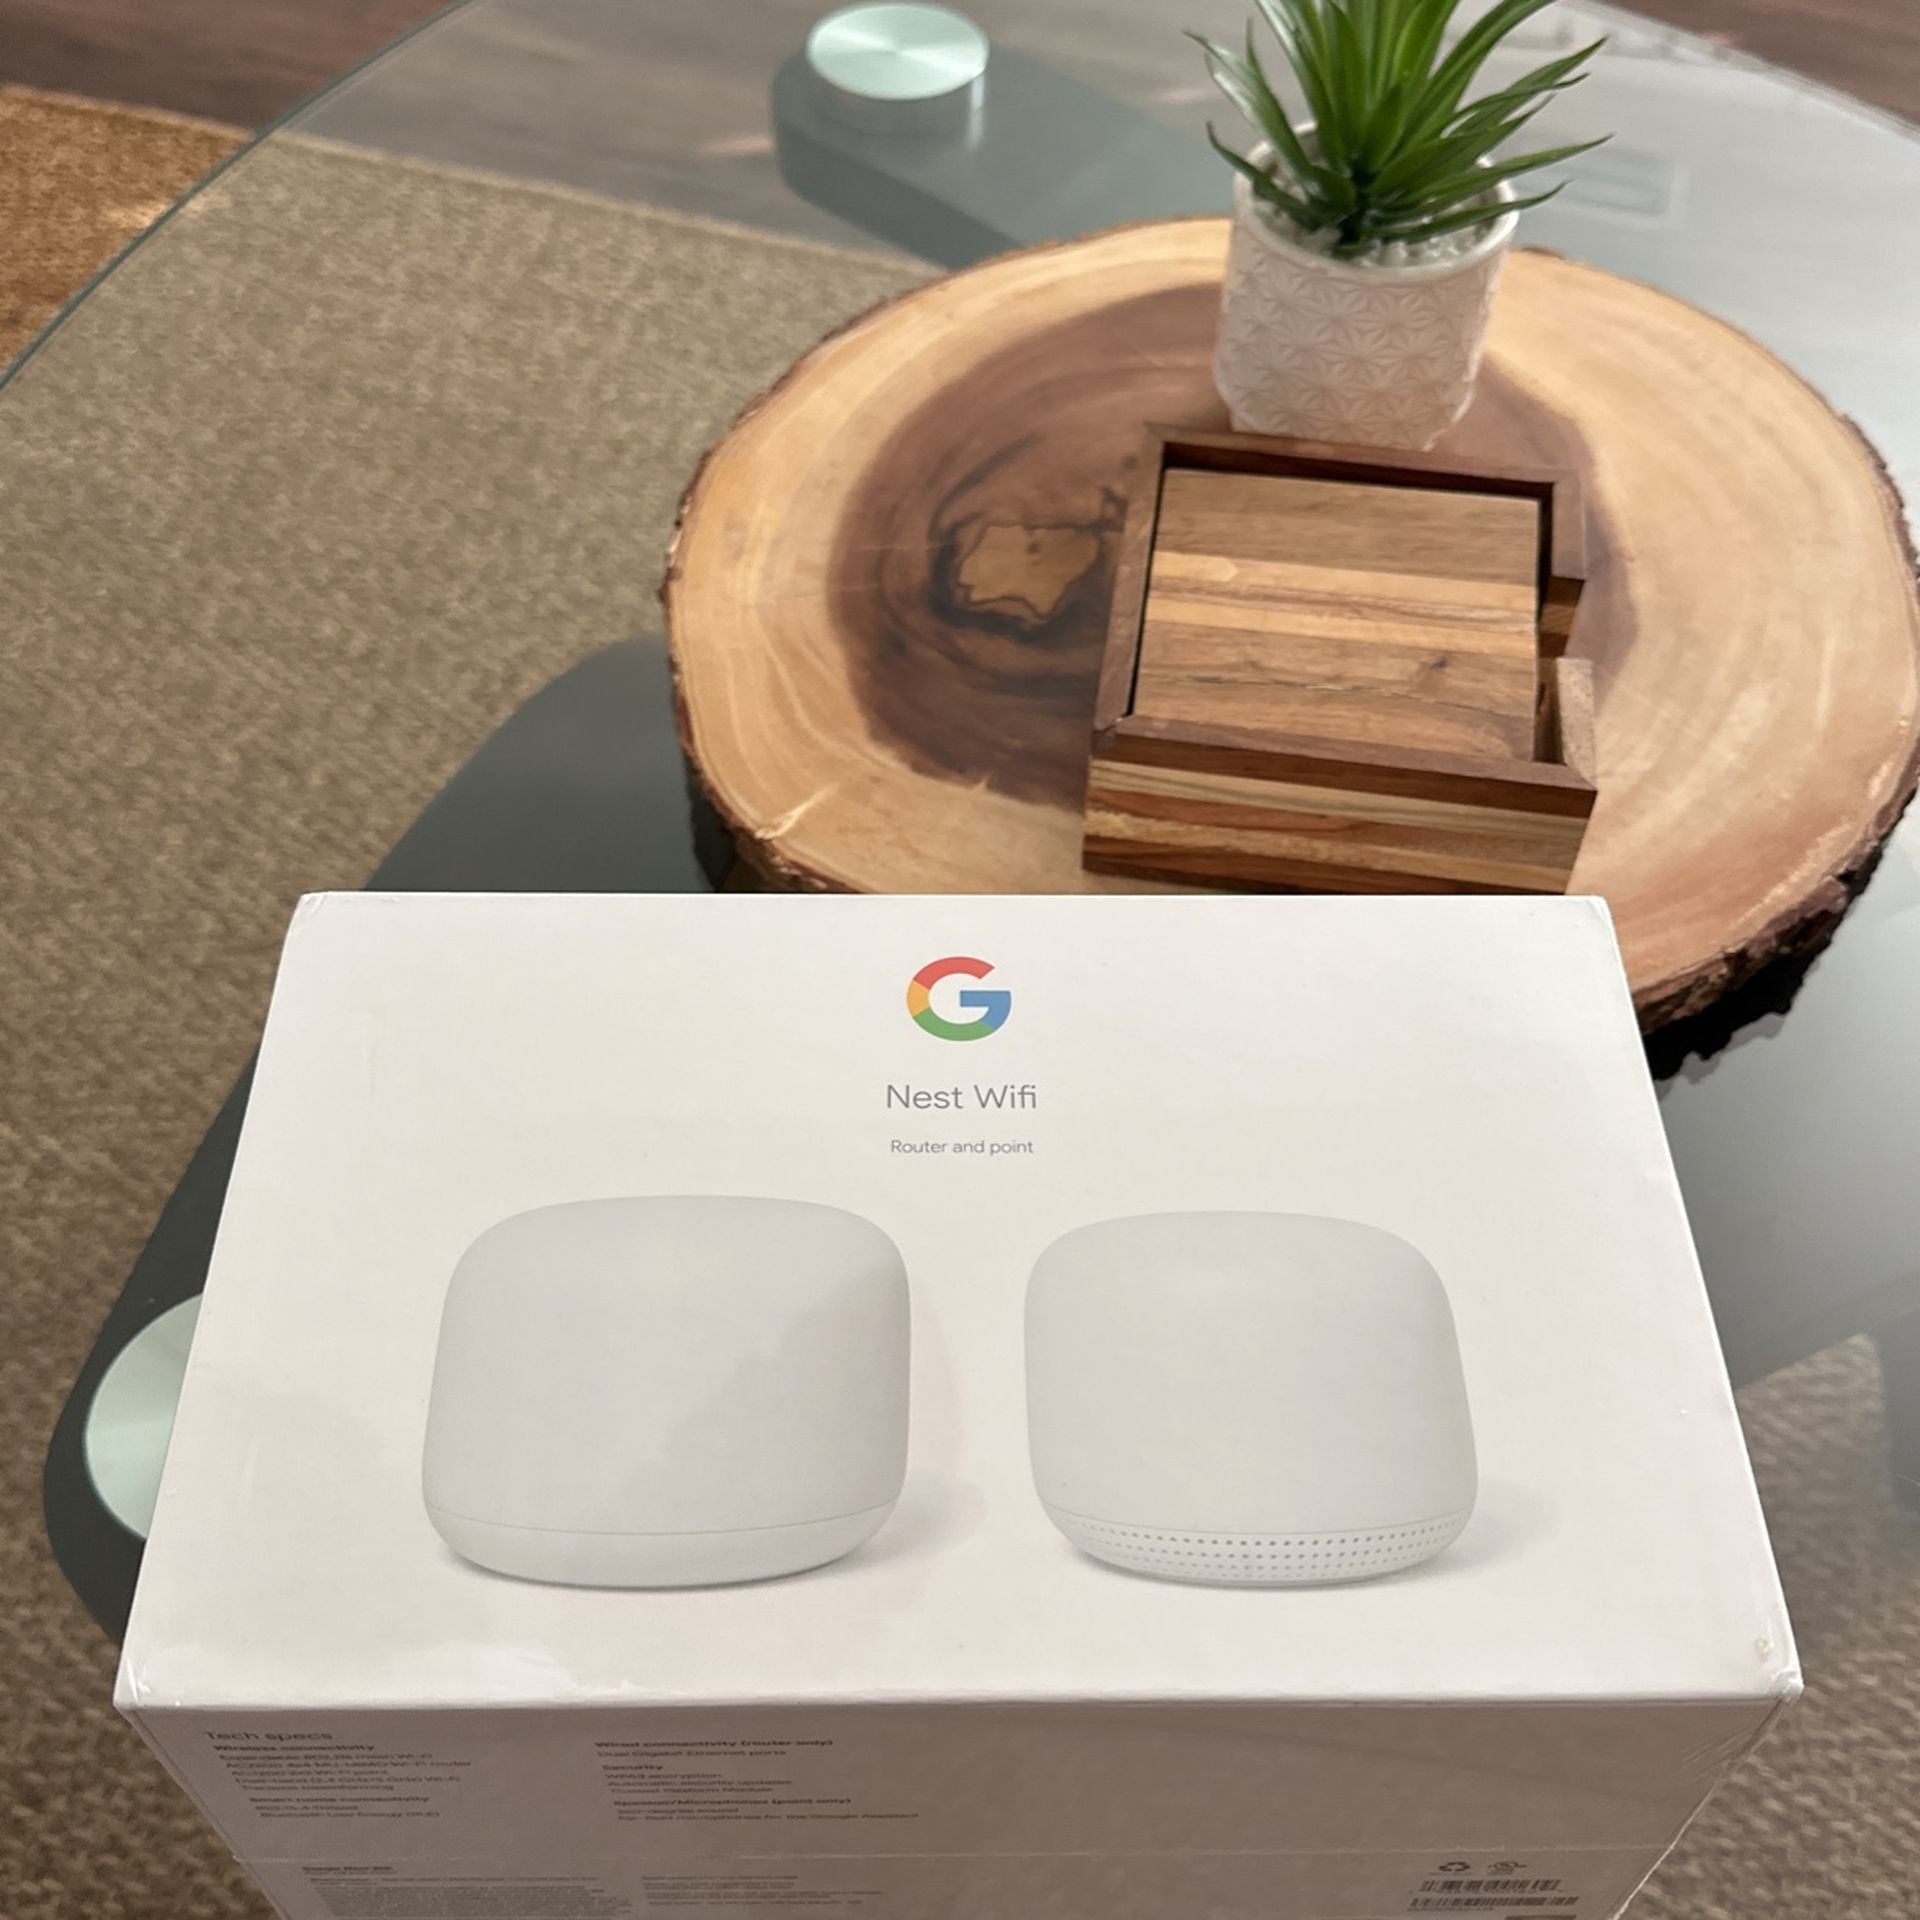 Google Nest Wifi Router And Point 